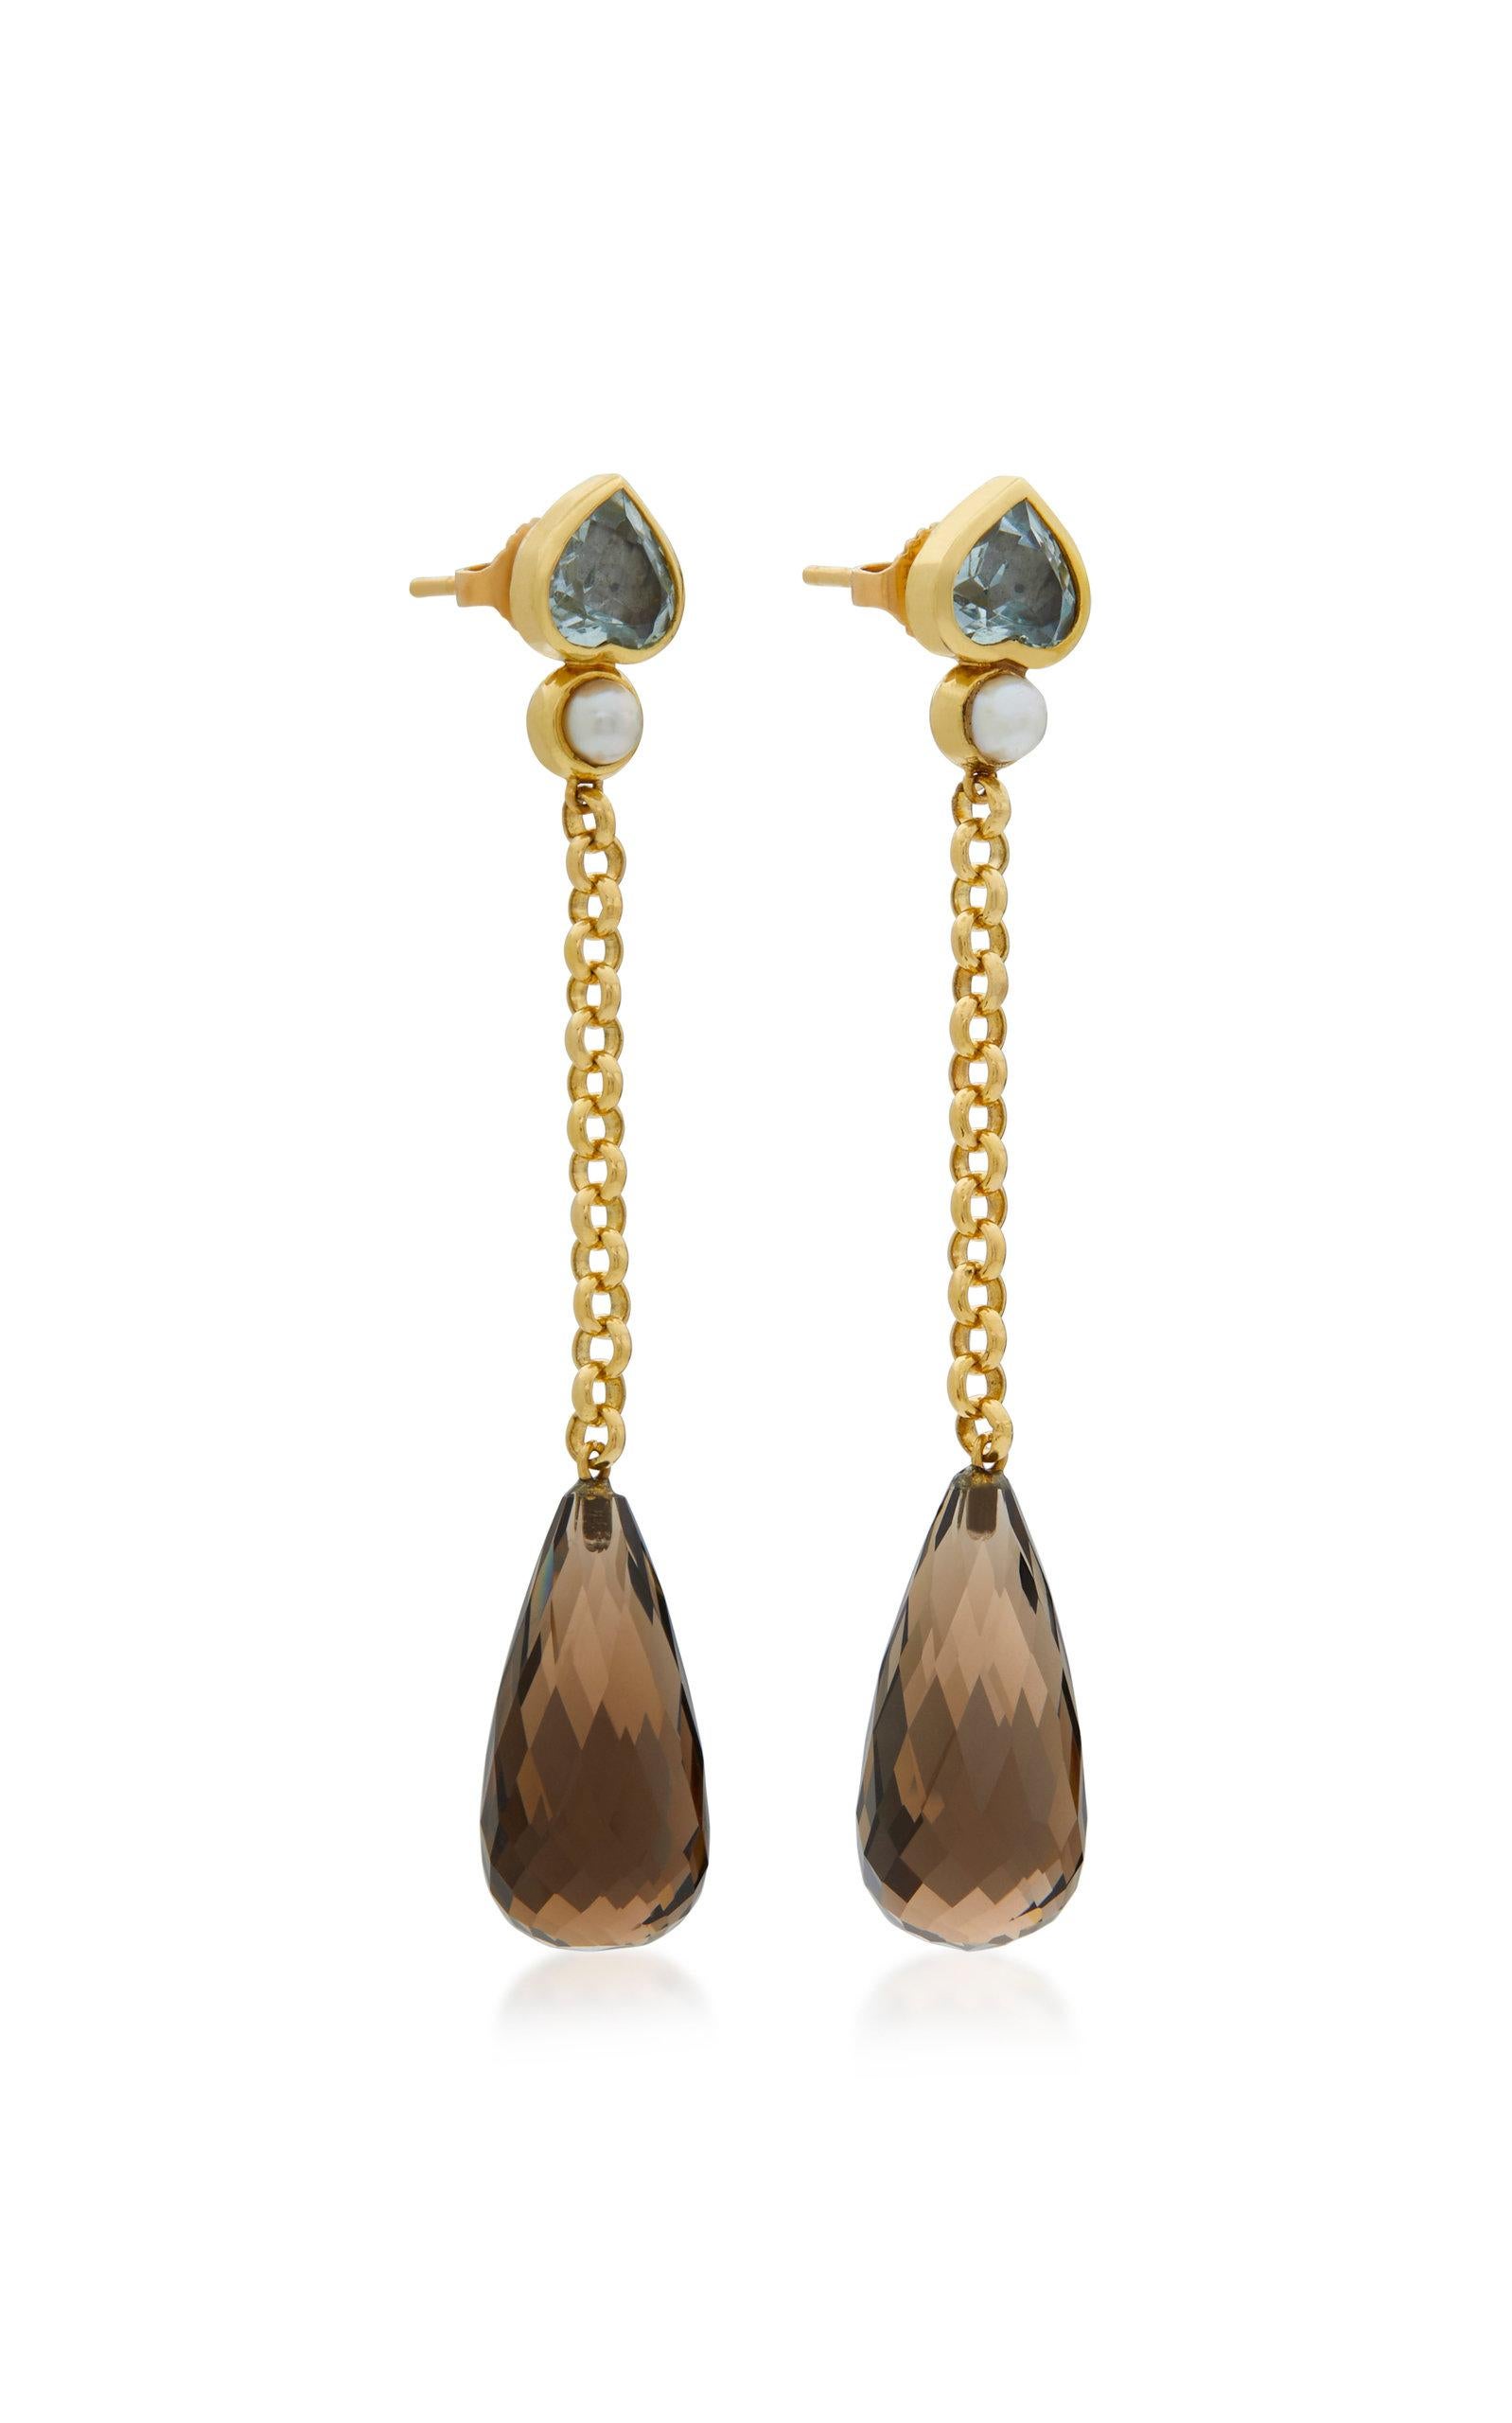 Dangle Earrings of heart shape Aqua studs with pearl and 18 karat yellow gold chain with a smokey Topaz briollette dangle. Signed Sorab & Roshi.
Aq= 2 cts., ST=35 cts.
2 1/4